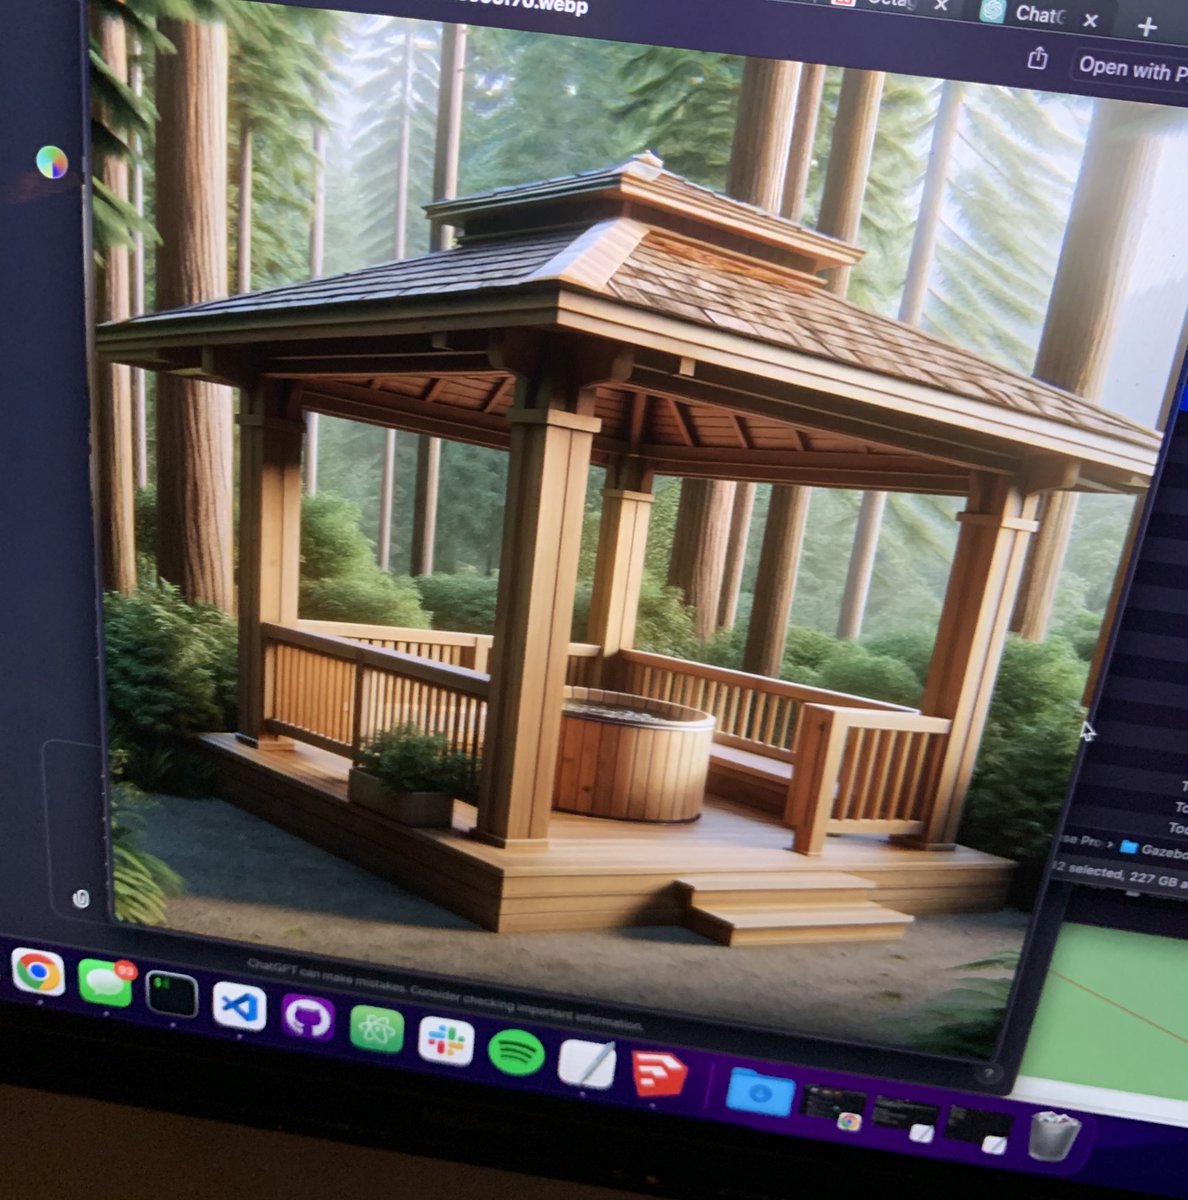 Another unique use for ChatGPT/DallE3 - design inspo. Here’s a sneak peak of some outdoor hot tub designs 🤩 (pardon the co